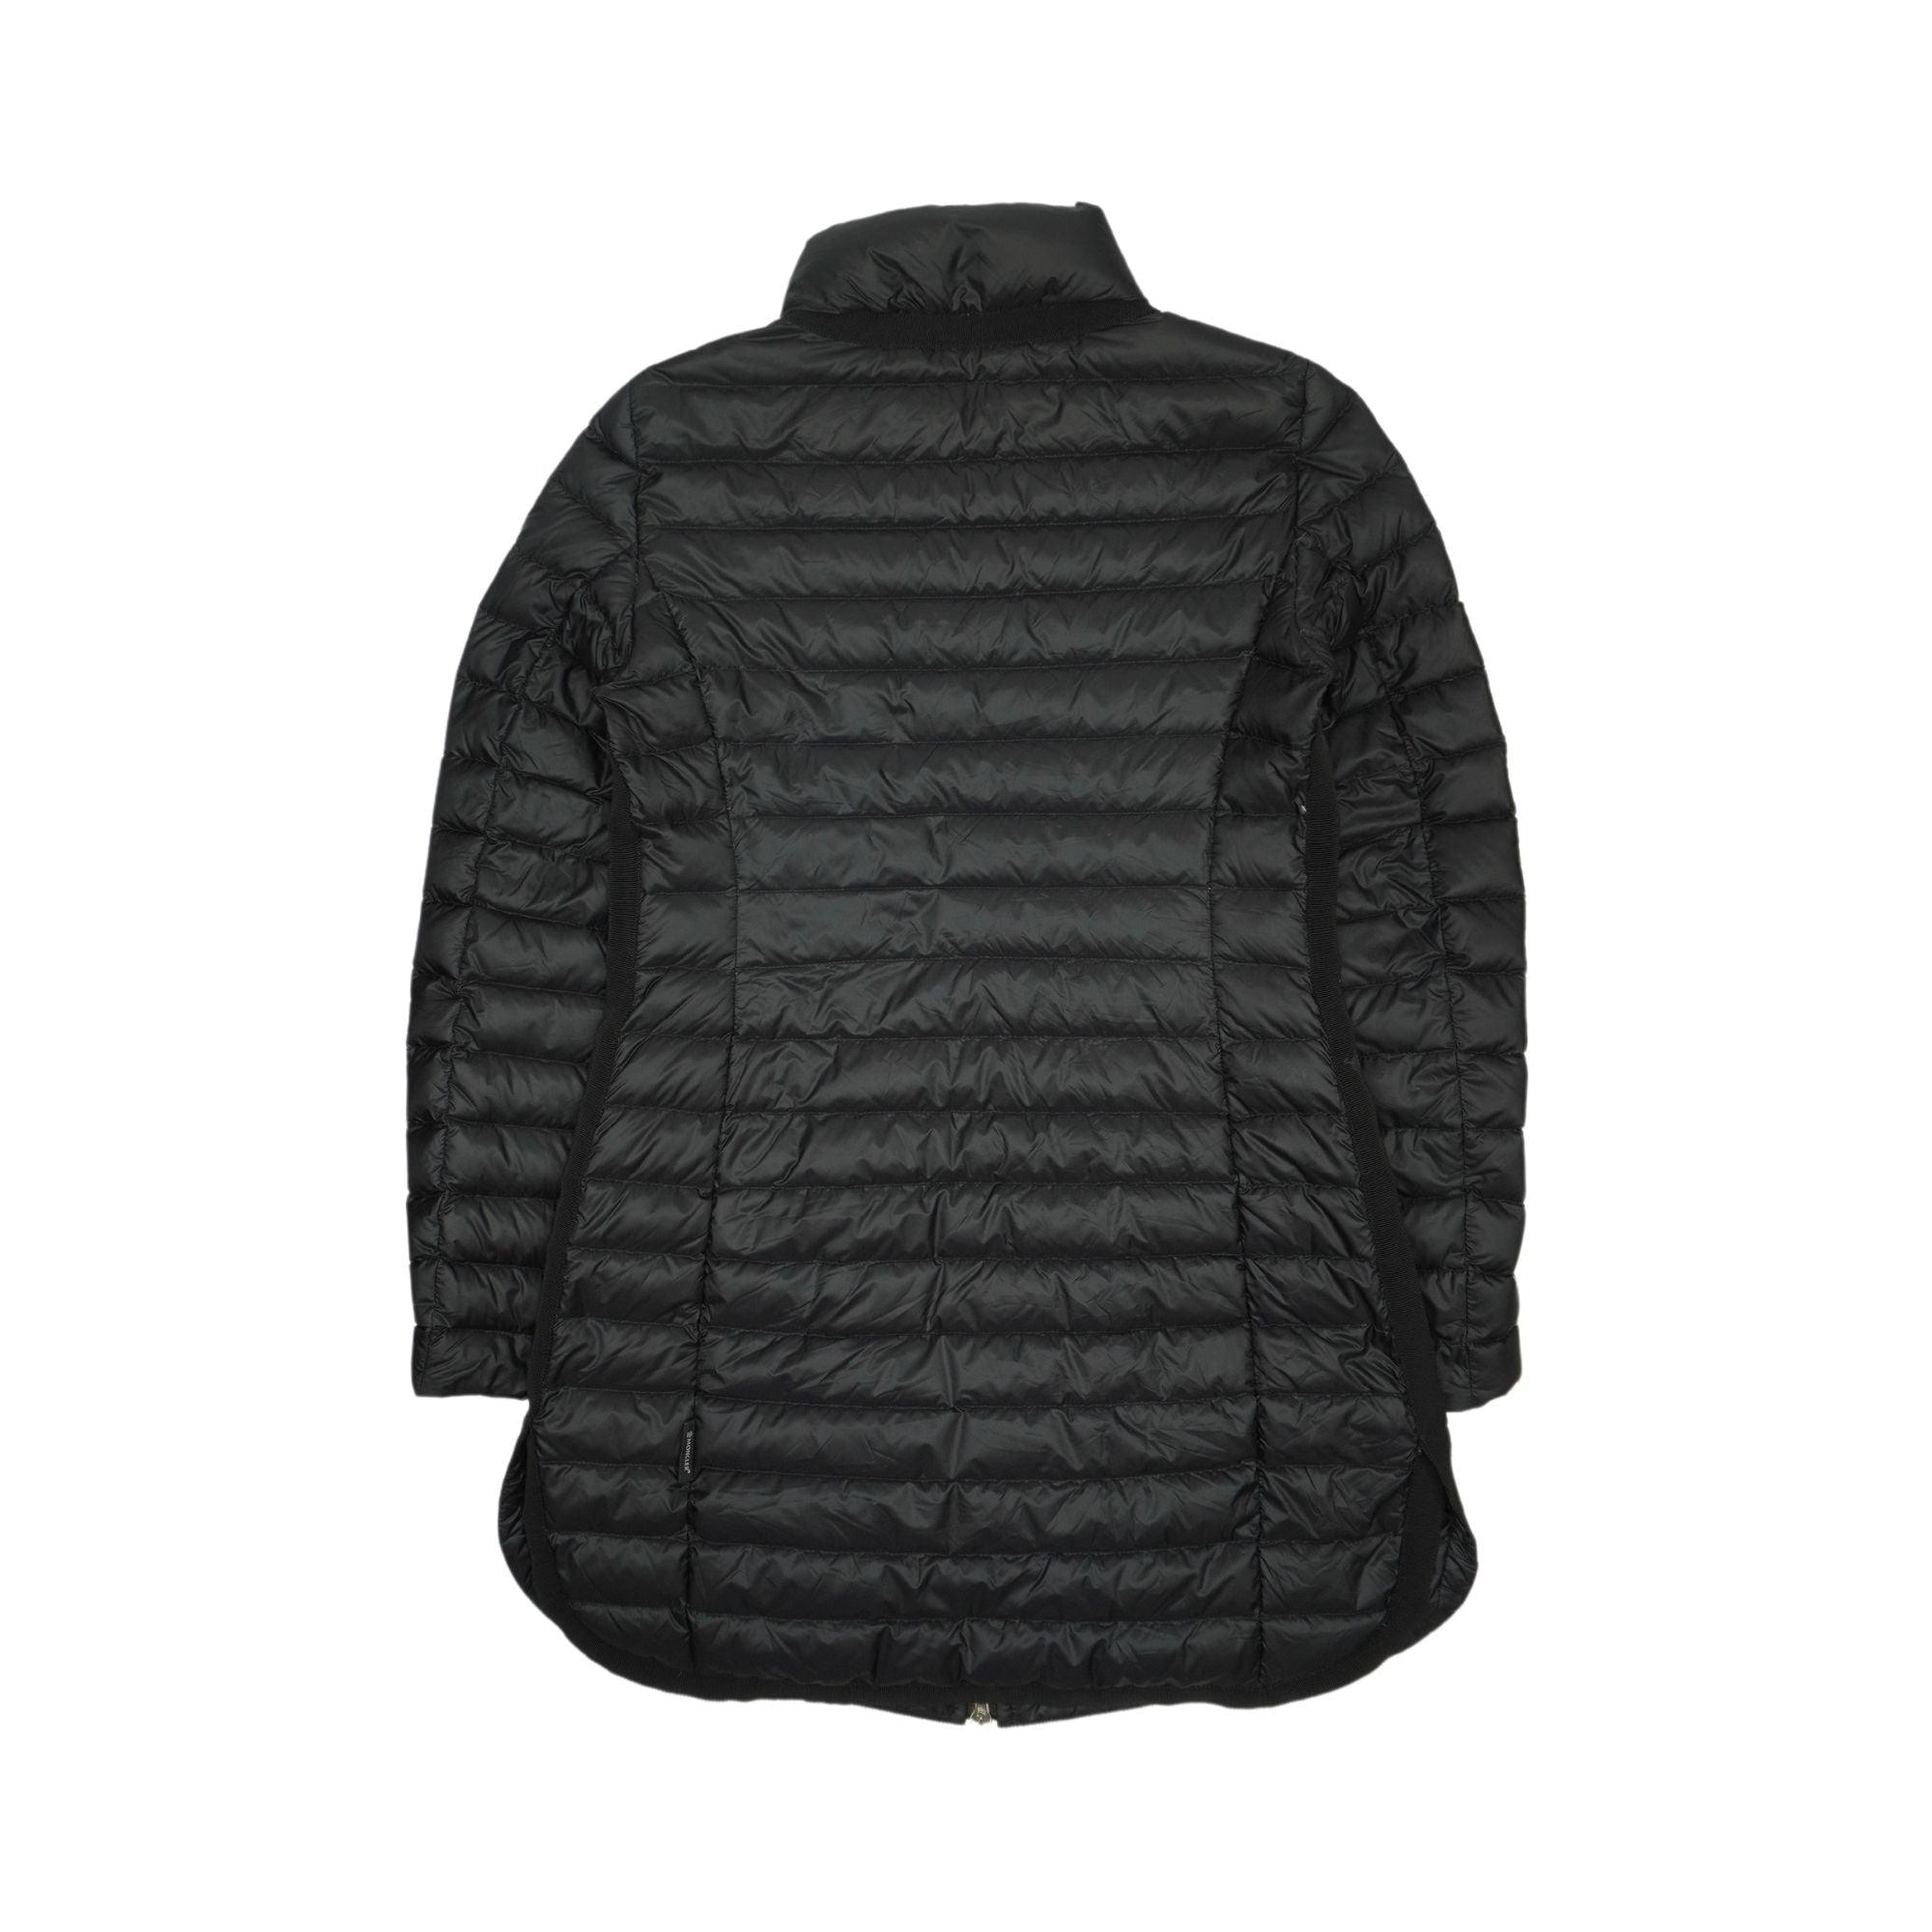 Moncler 'Bogue' Jacket - Women's 1 - Fashionably Yours